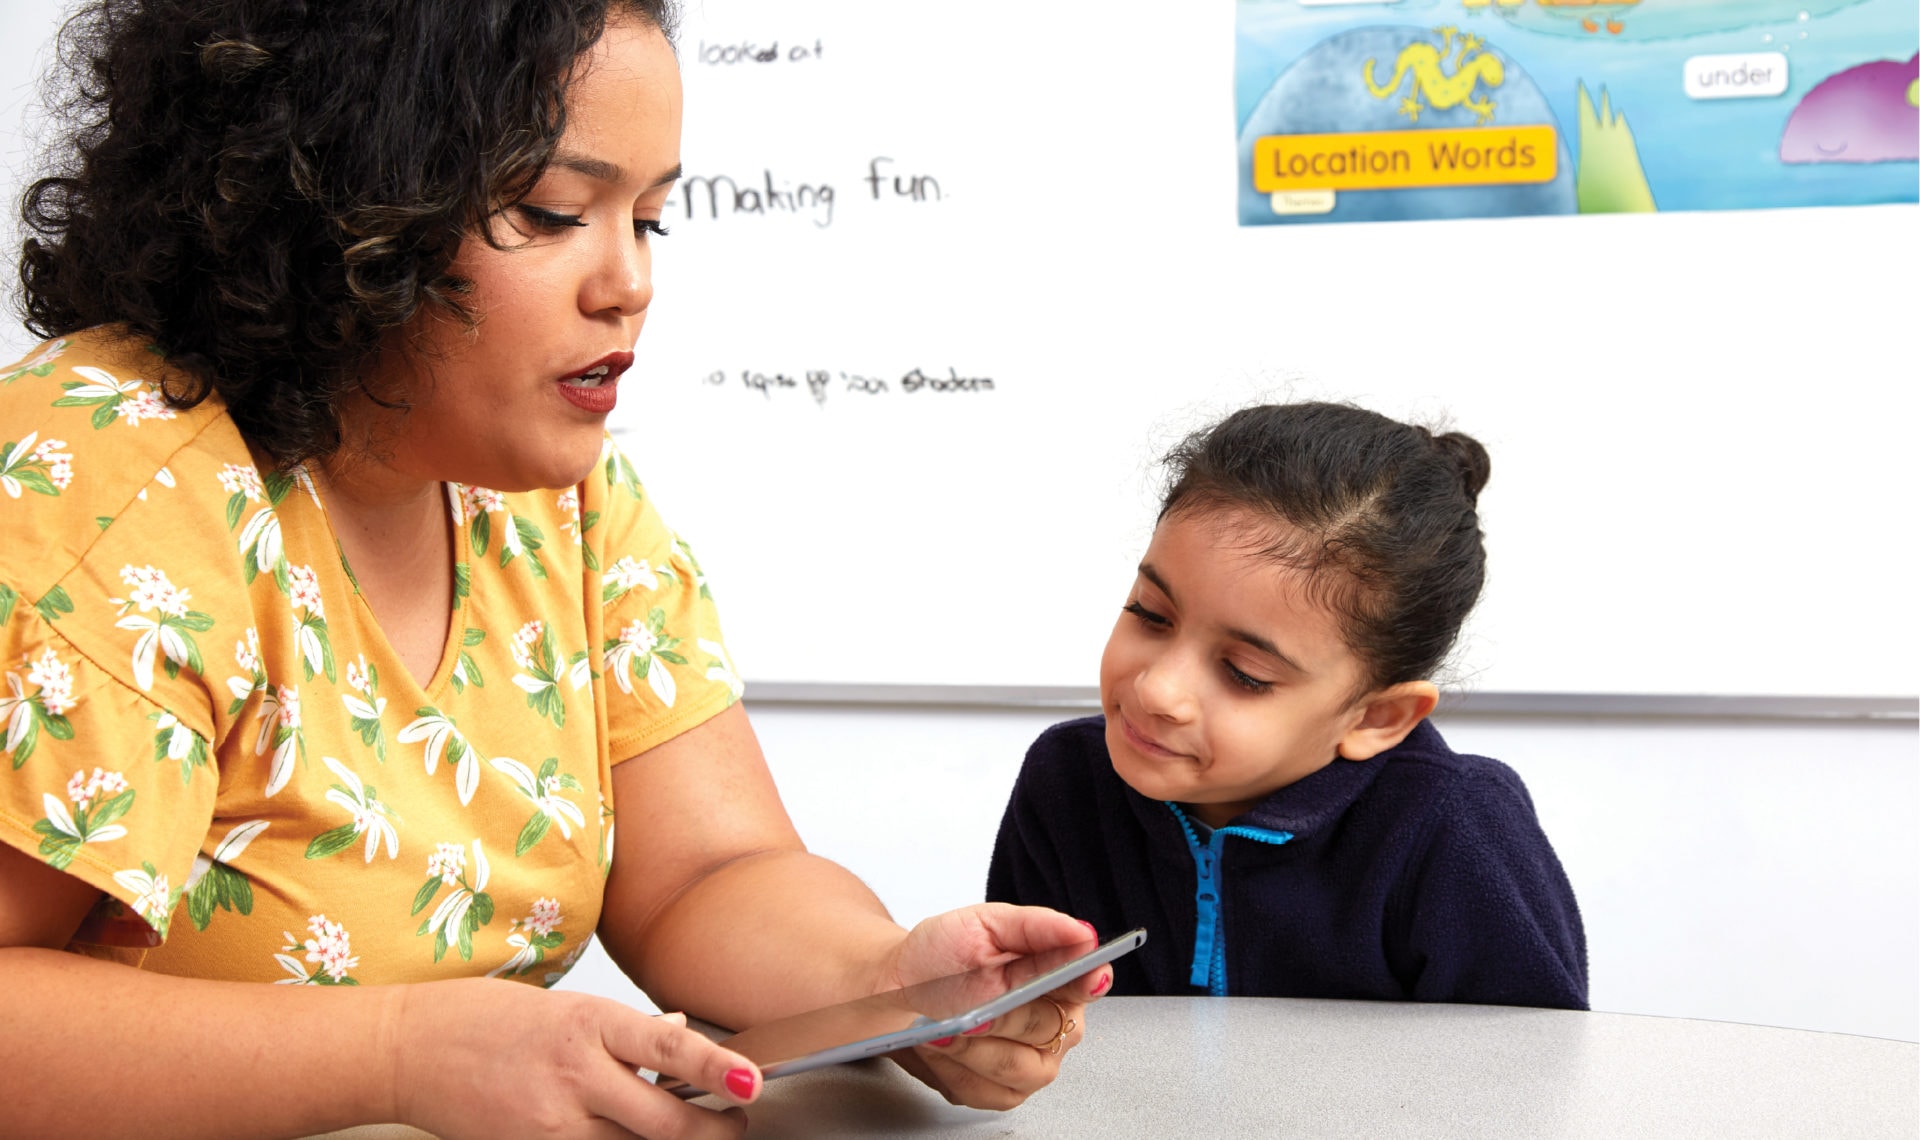 A teacher using a tablet interacts with a young student in a classroom, with educational posters in the background.